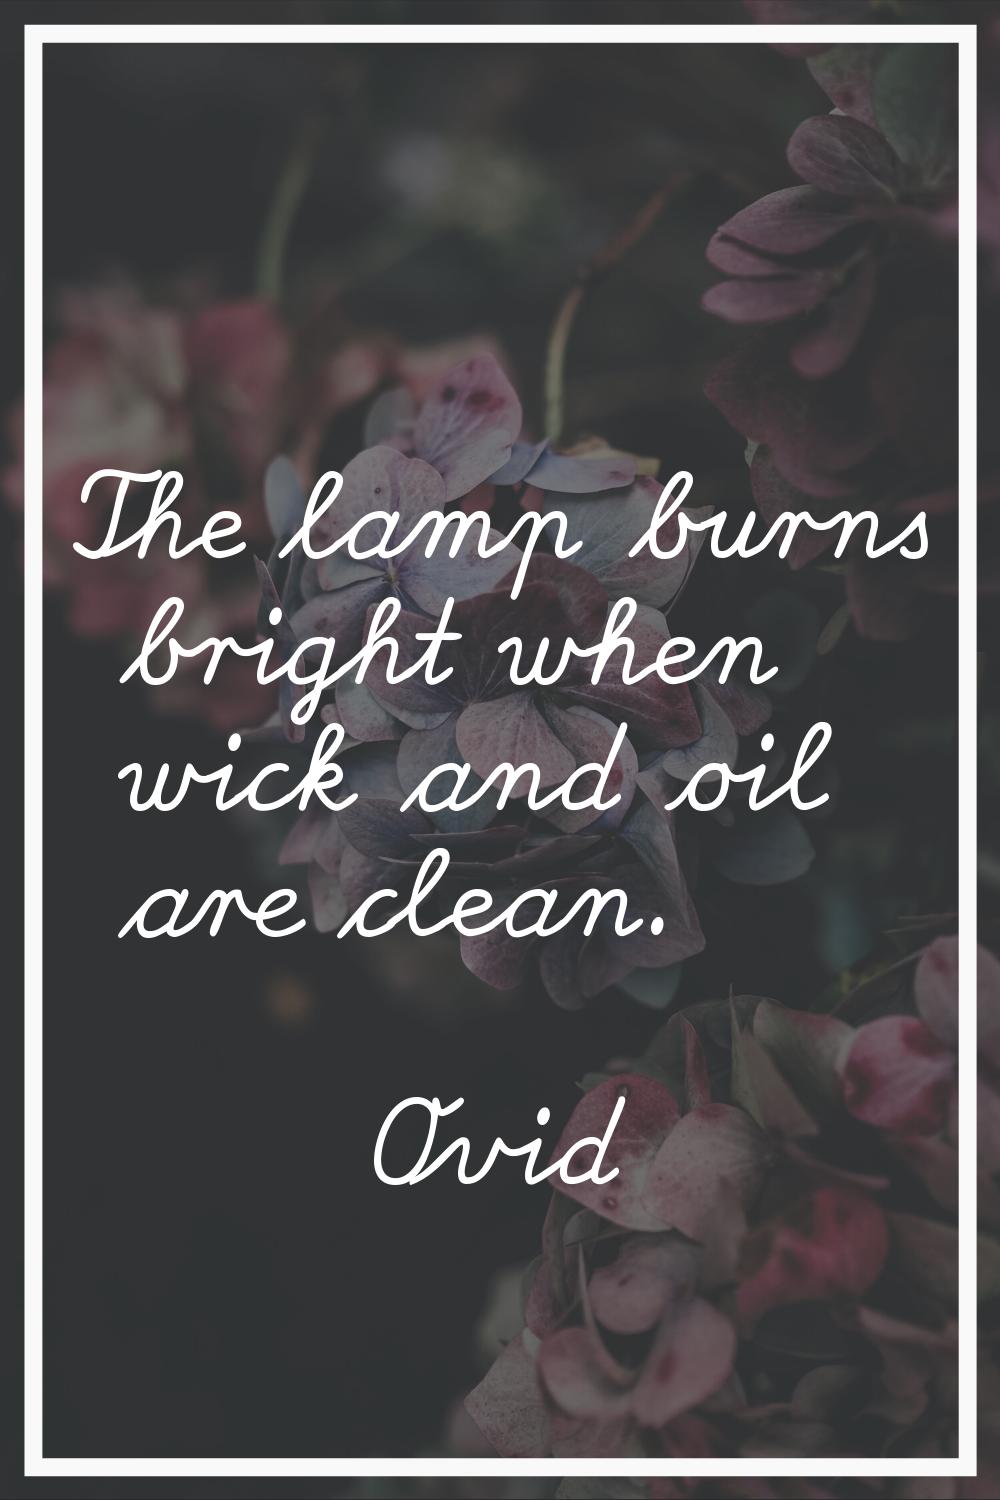 The lamp burns bright when wick and oil are clean.